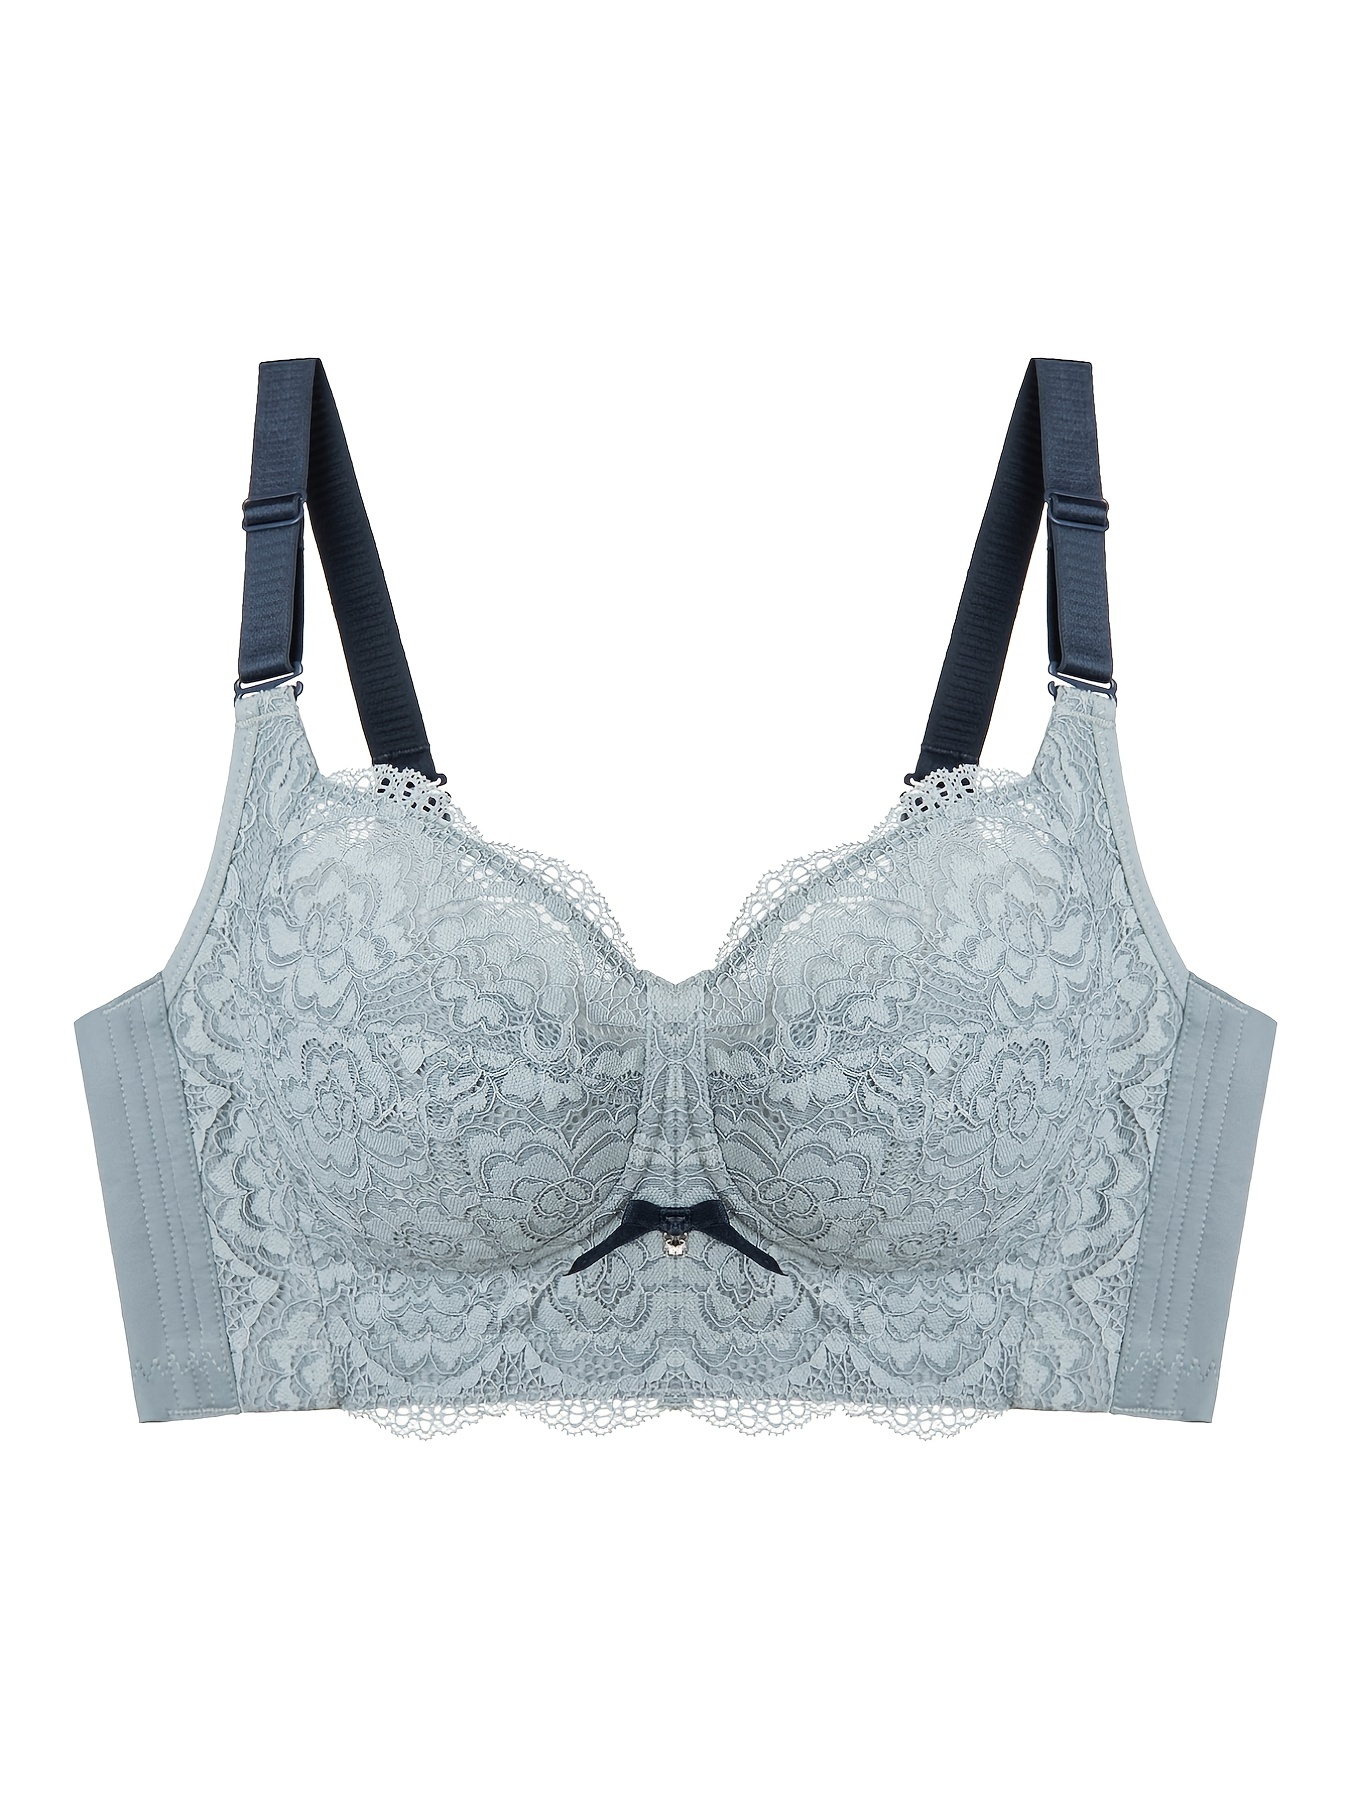 Bras N Things - NEW Melody longline push up bra - giving us those boho  vibes with floral lace in a two-toned powder blue and denim look.